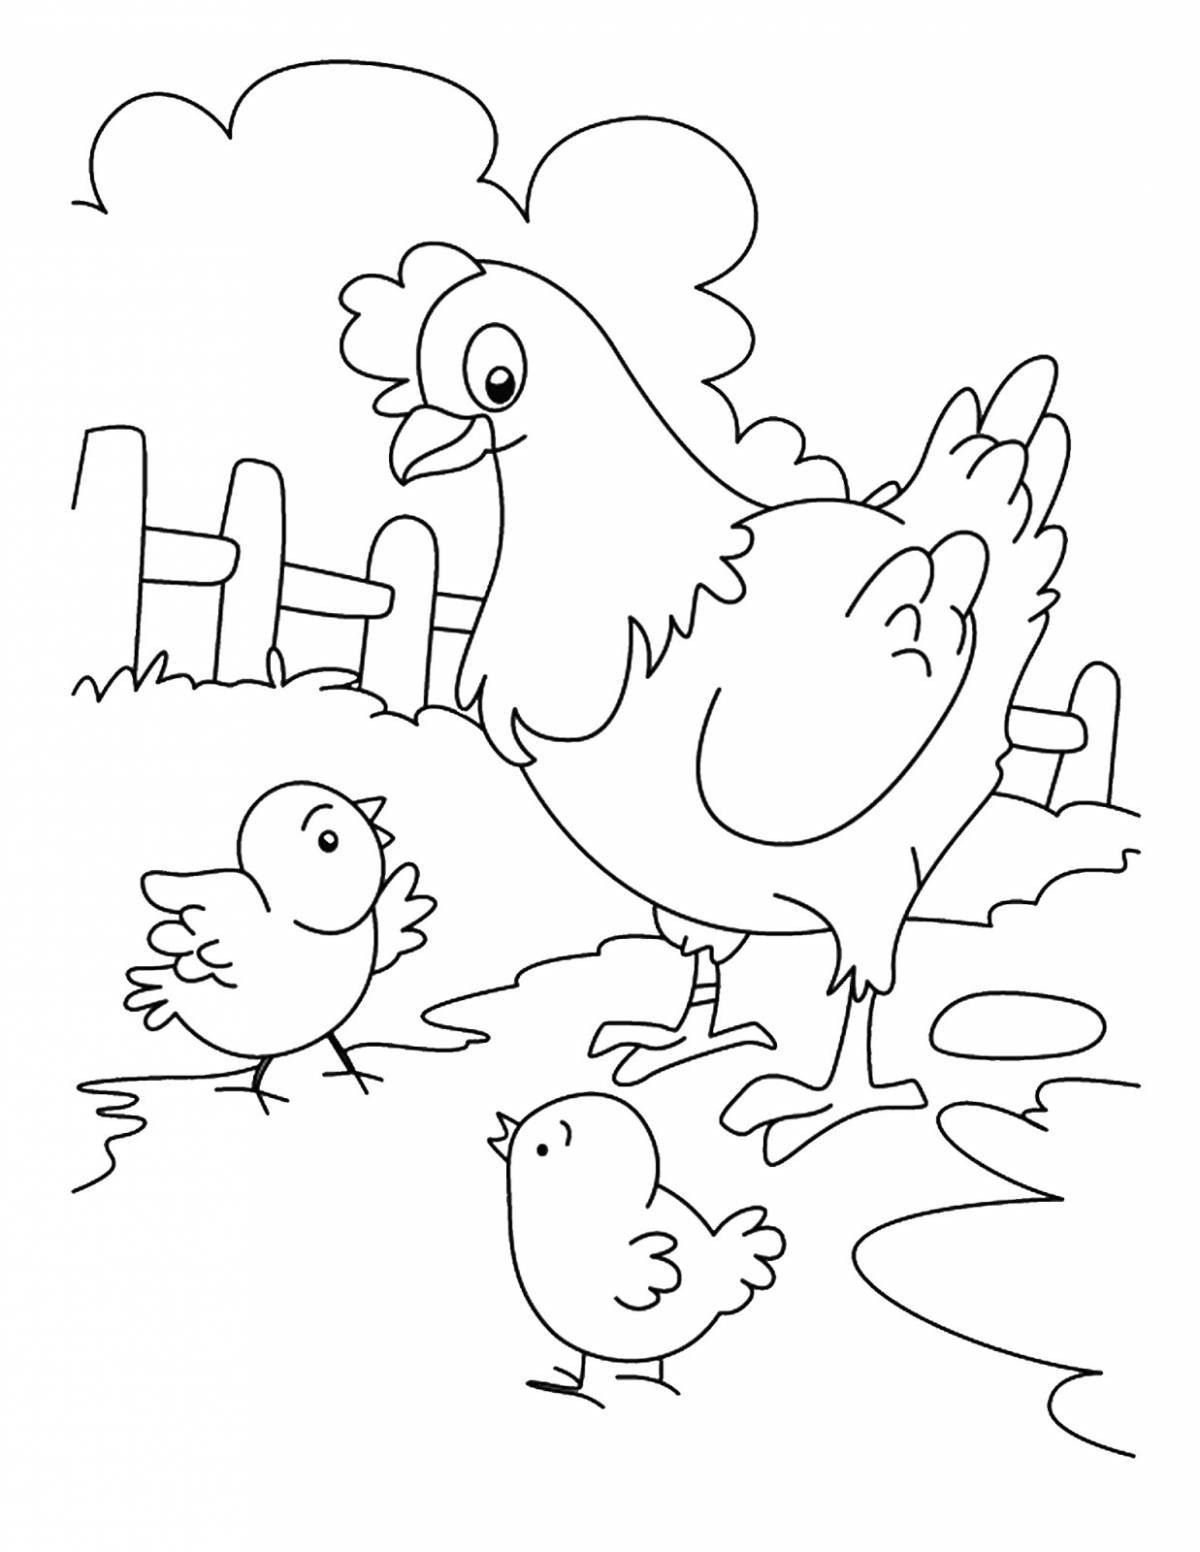 Attractive poultry coloring page